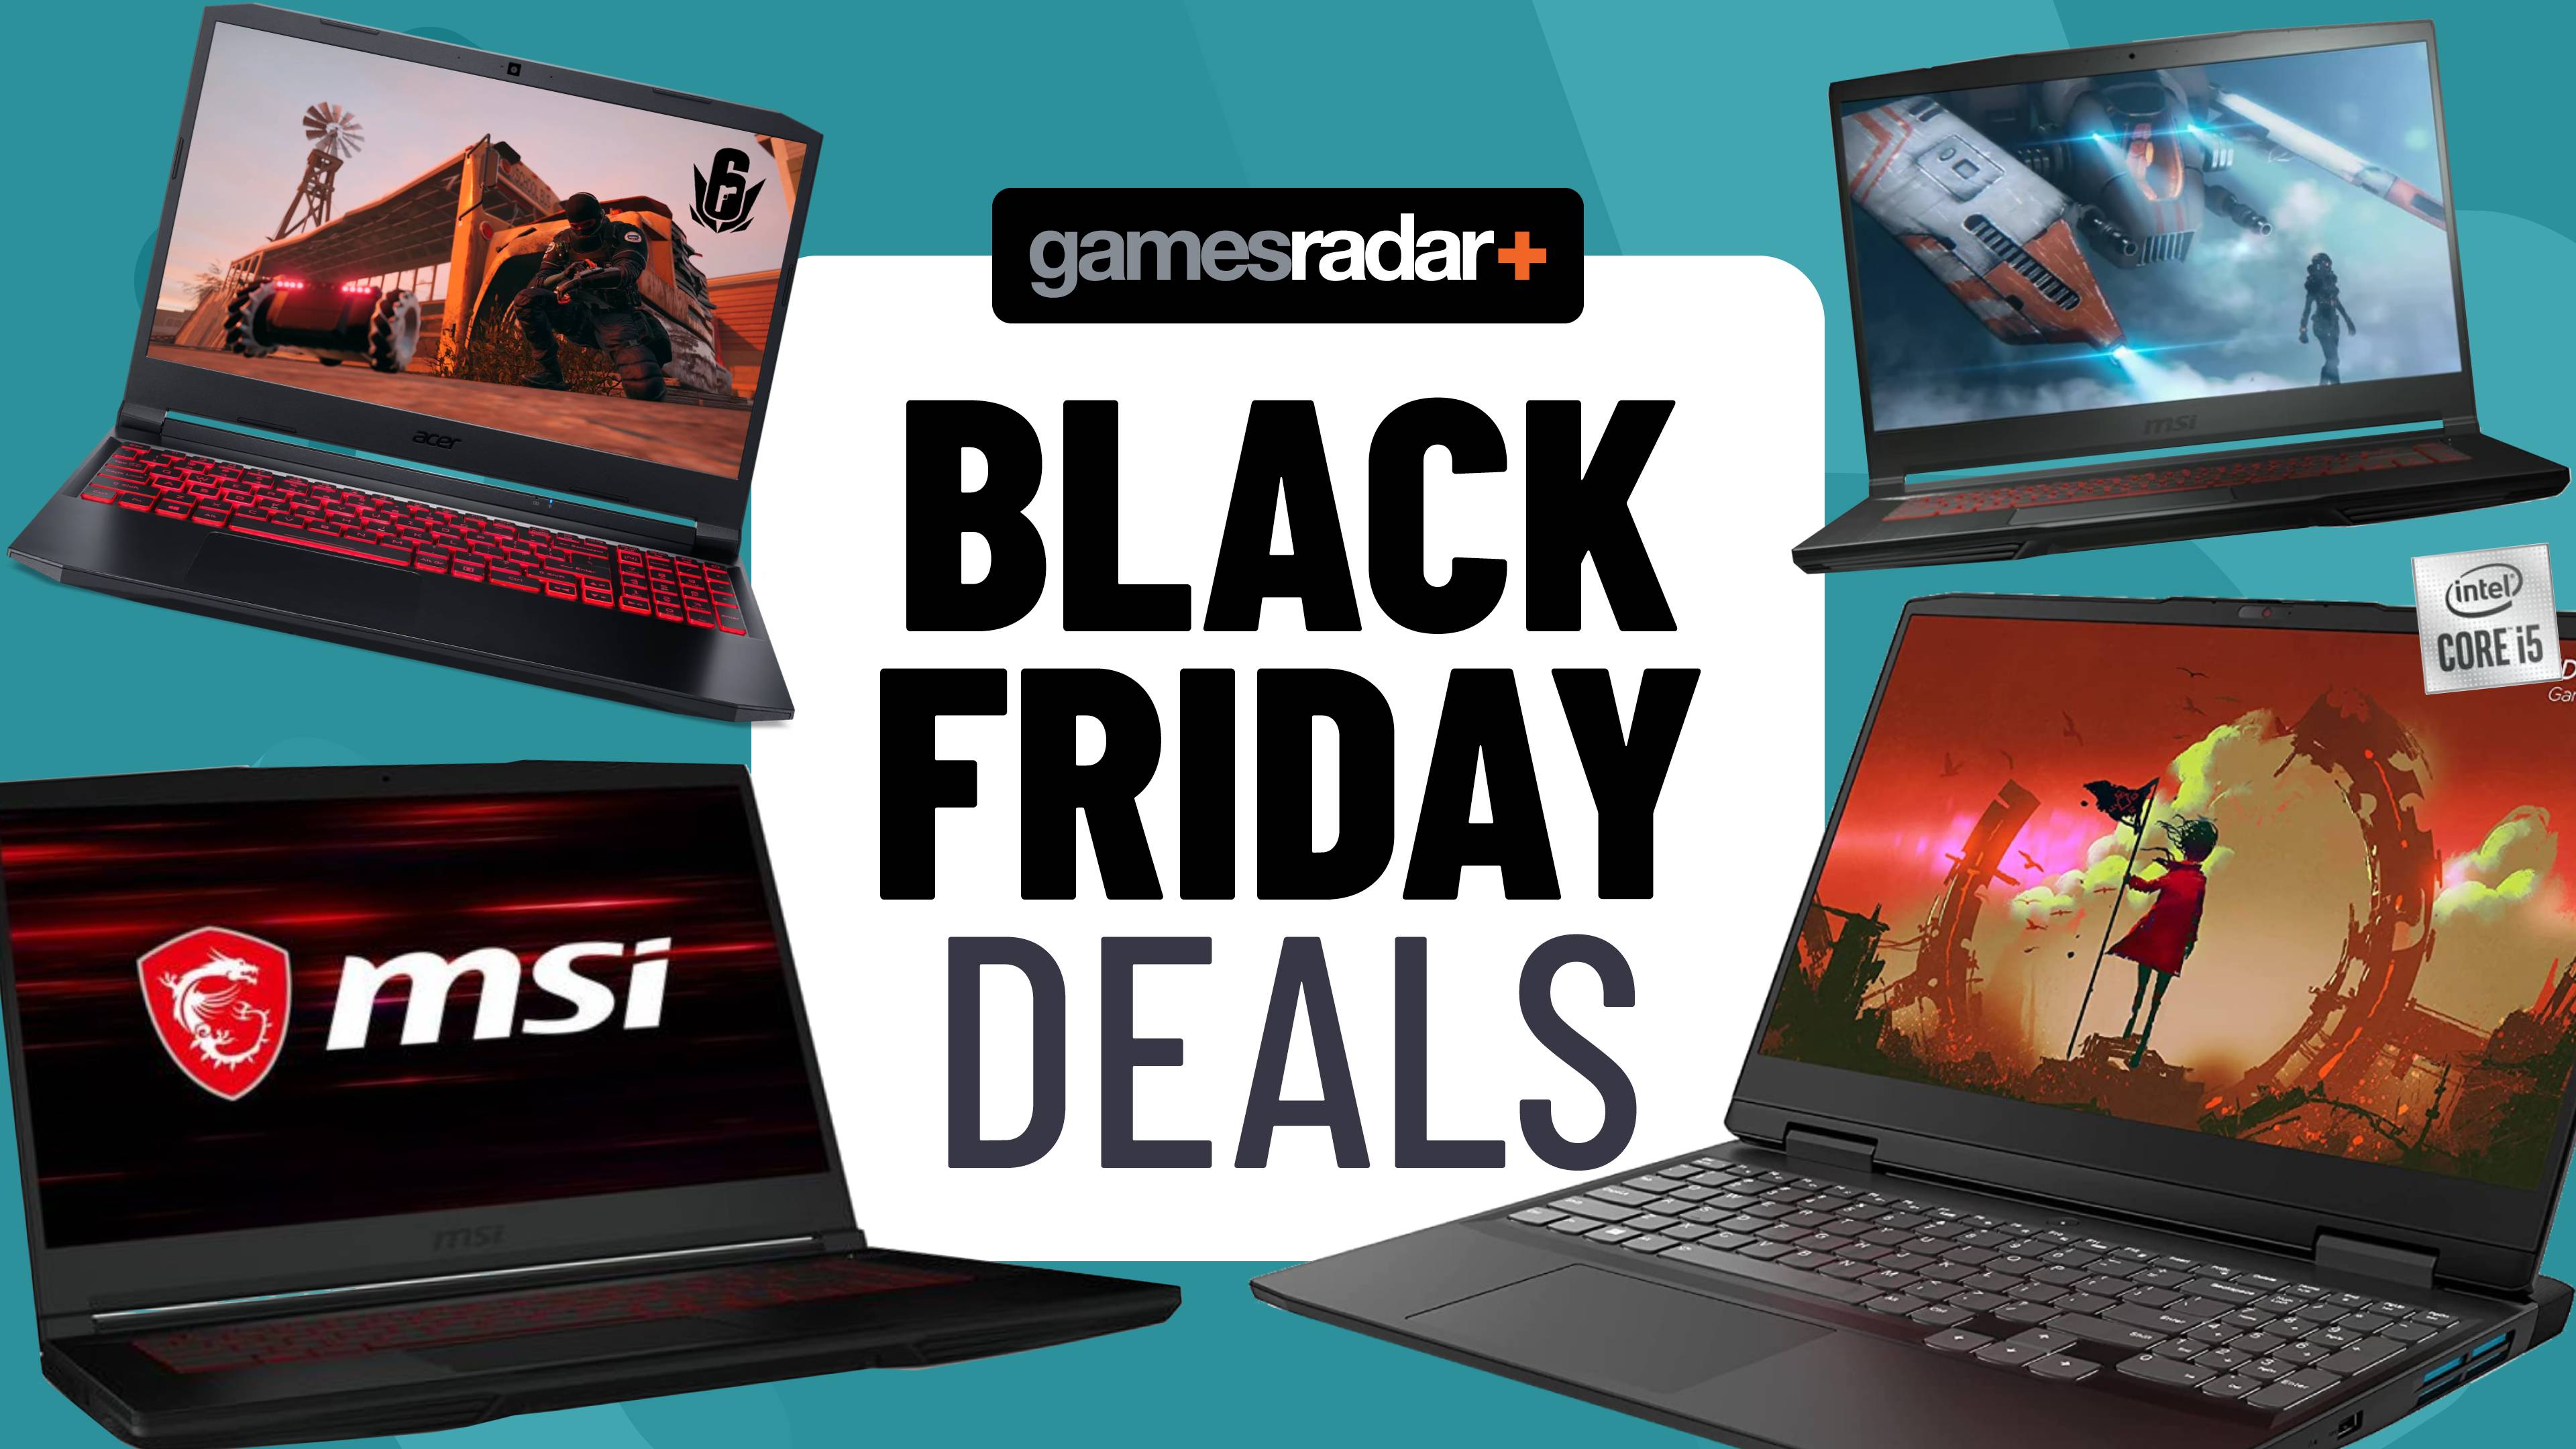 Black Friday gaming laptop deals live all the best gaming laptop deals